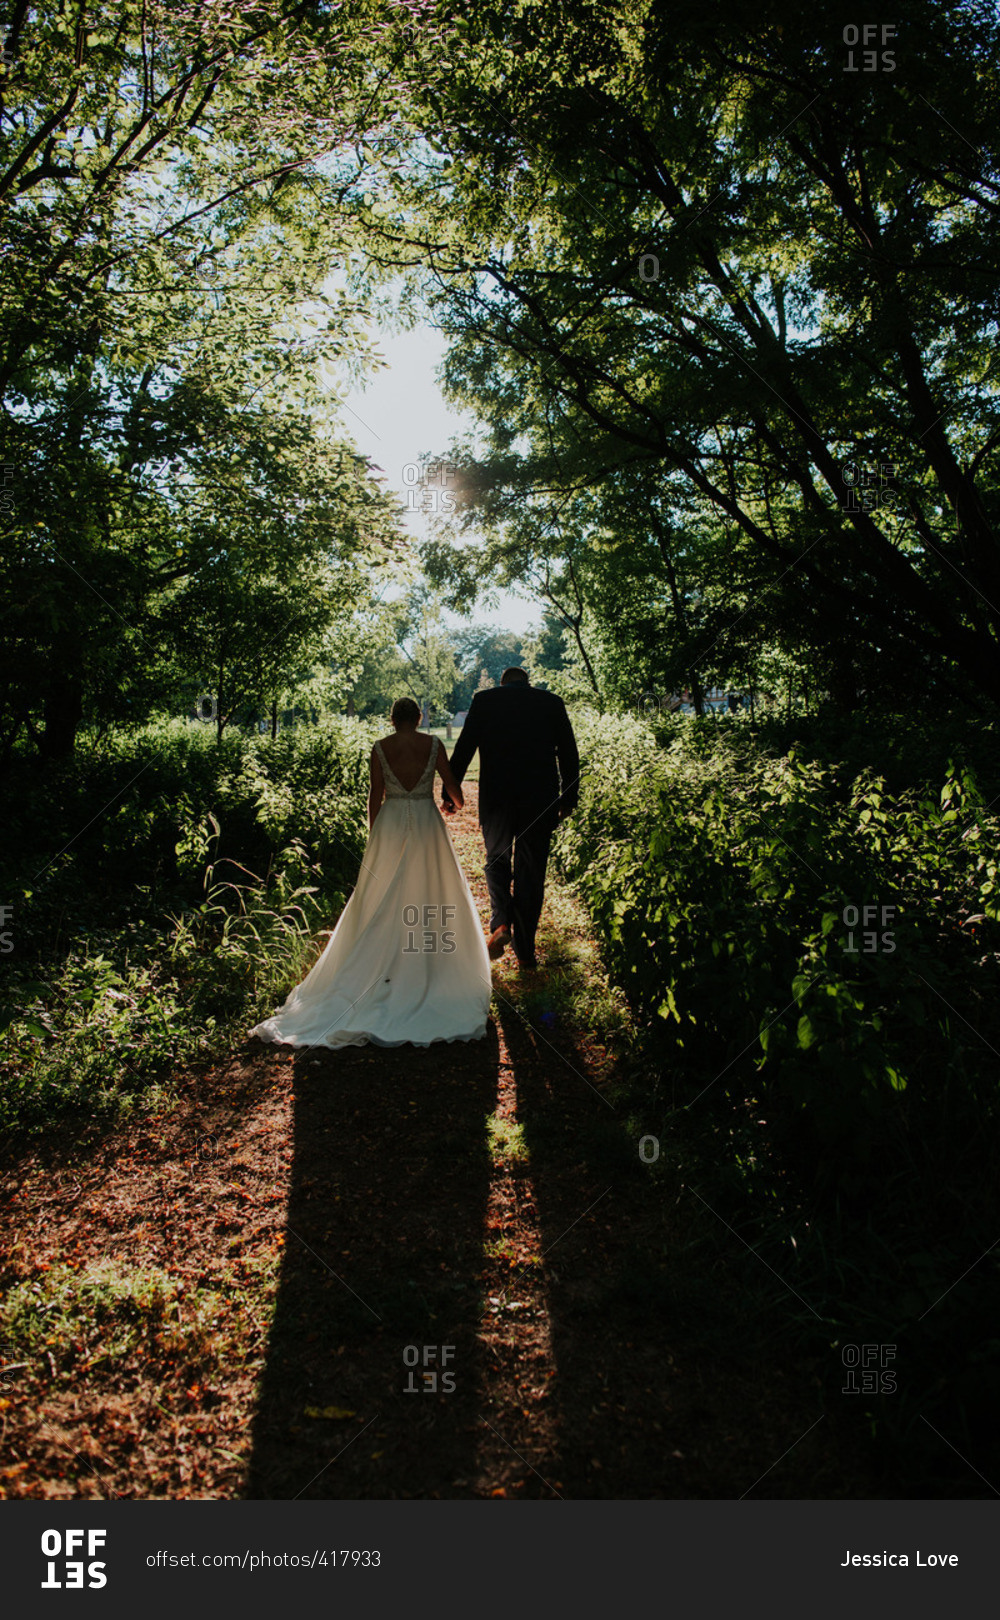 Back view of bride and groom walking on path in woods